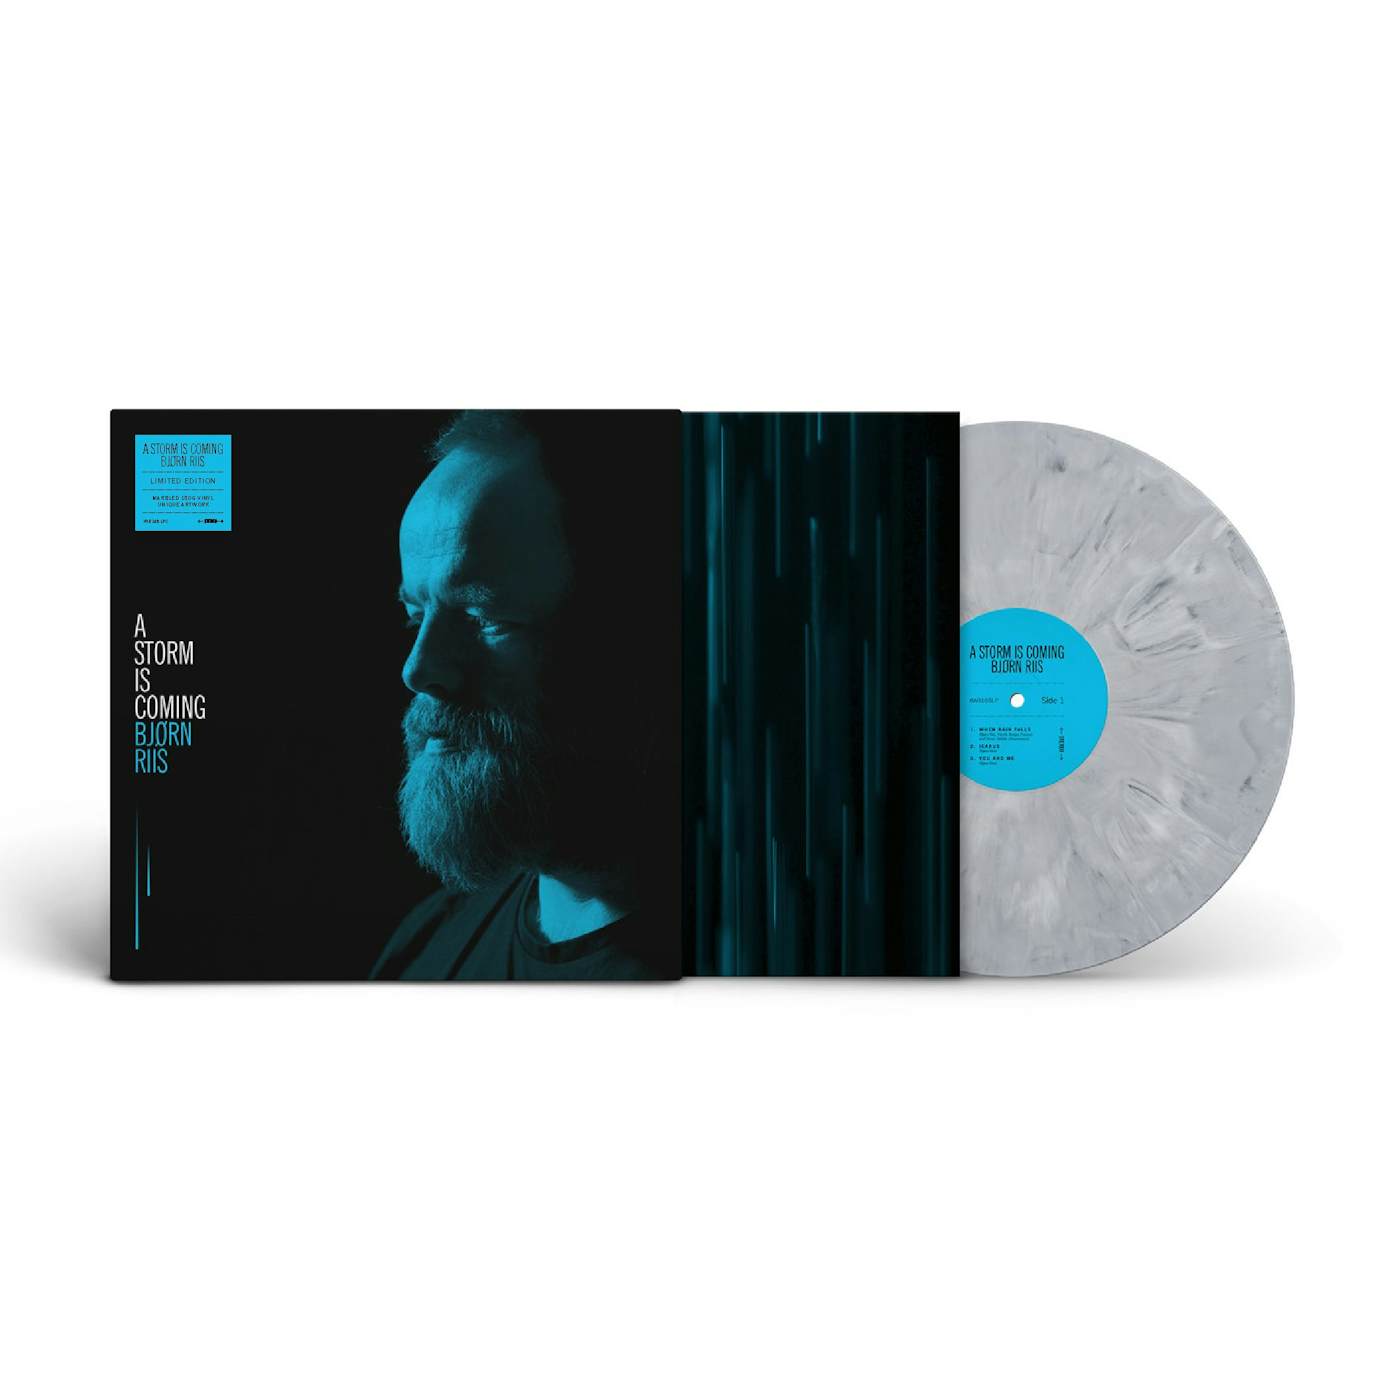 Bjørn Riis "A Storm Is Coming" Limited Edition 12"